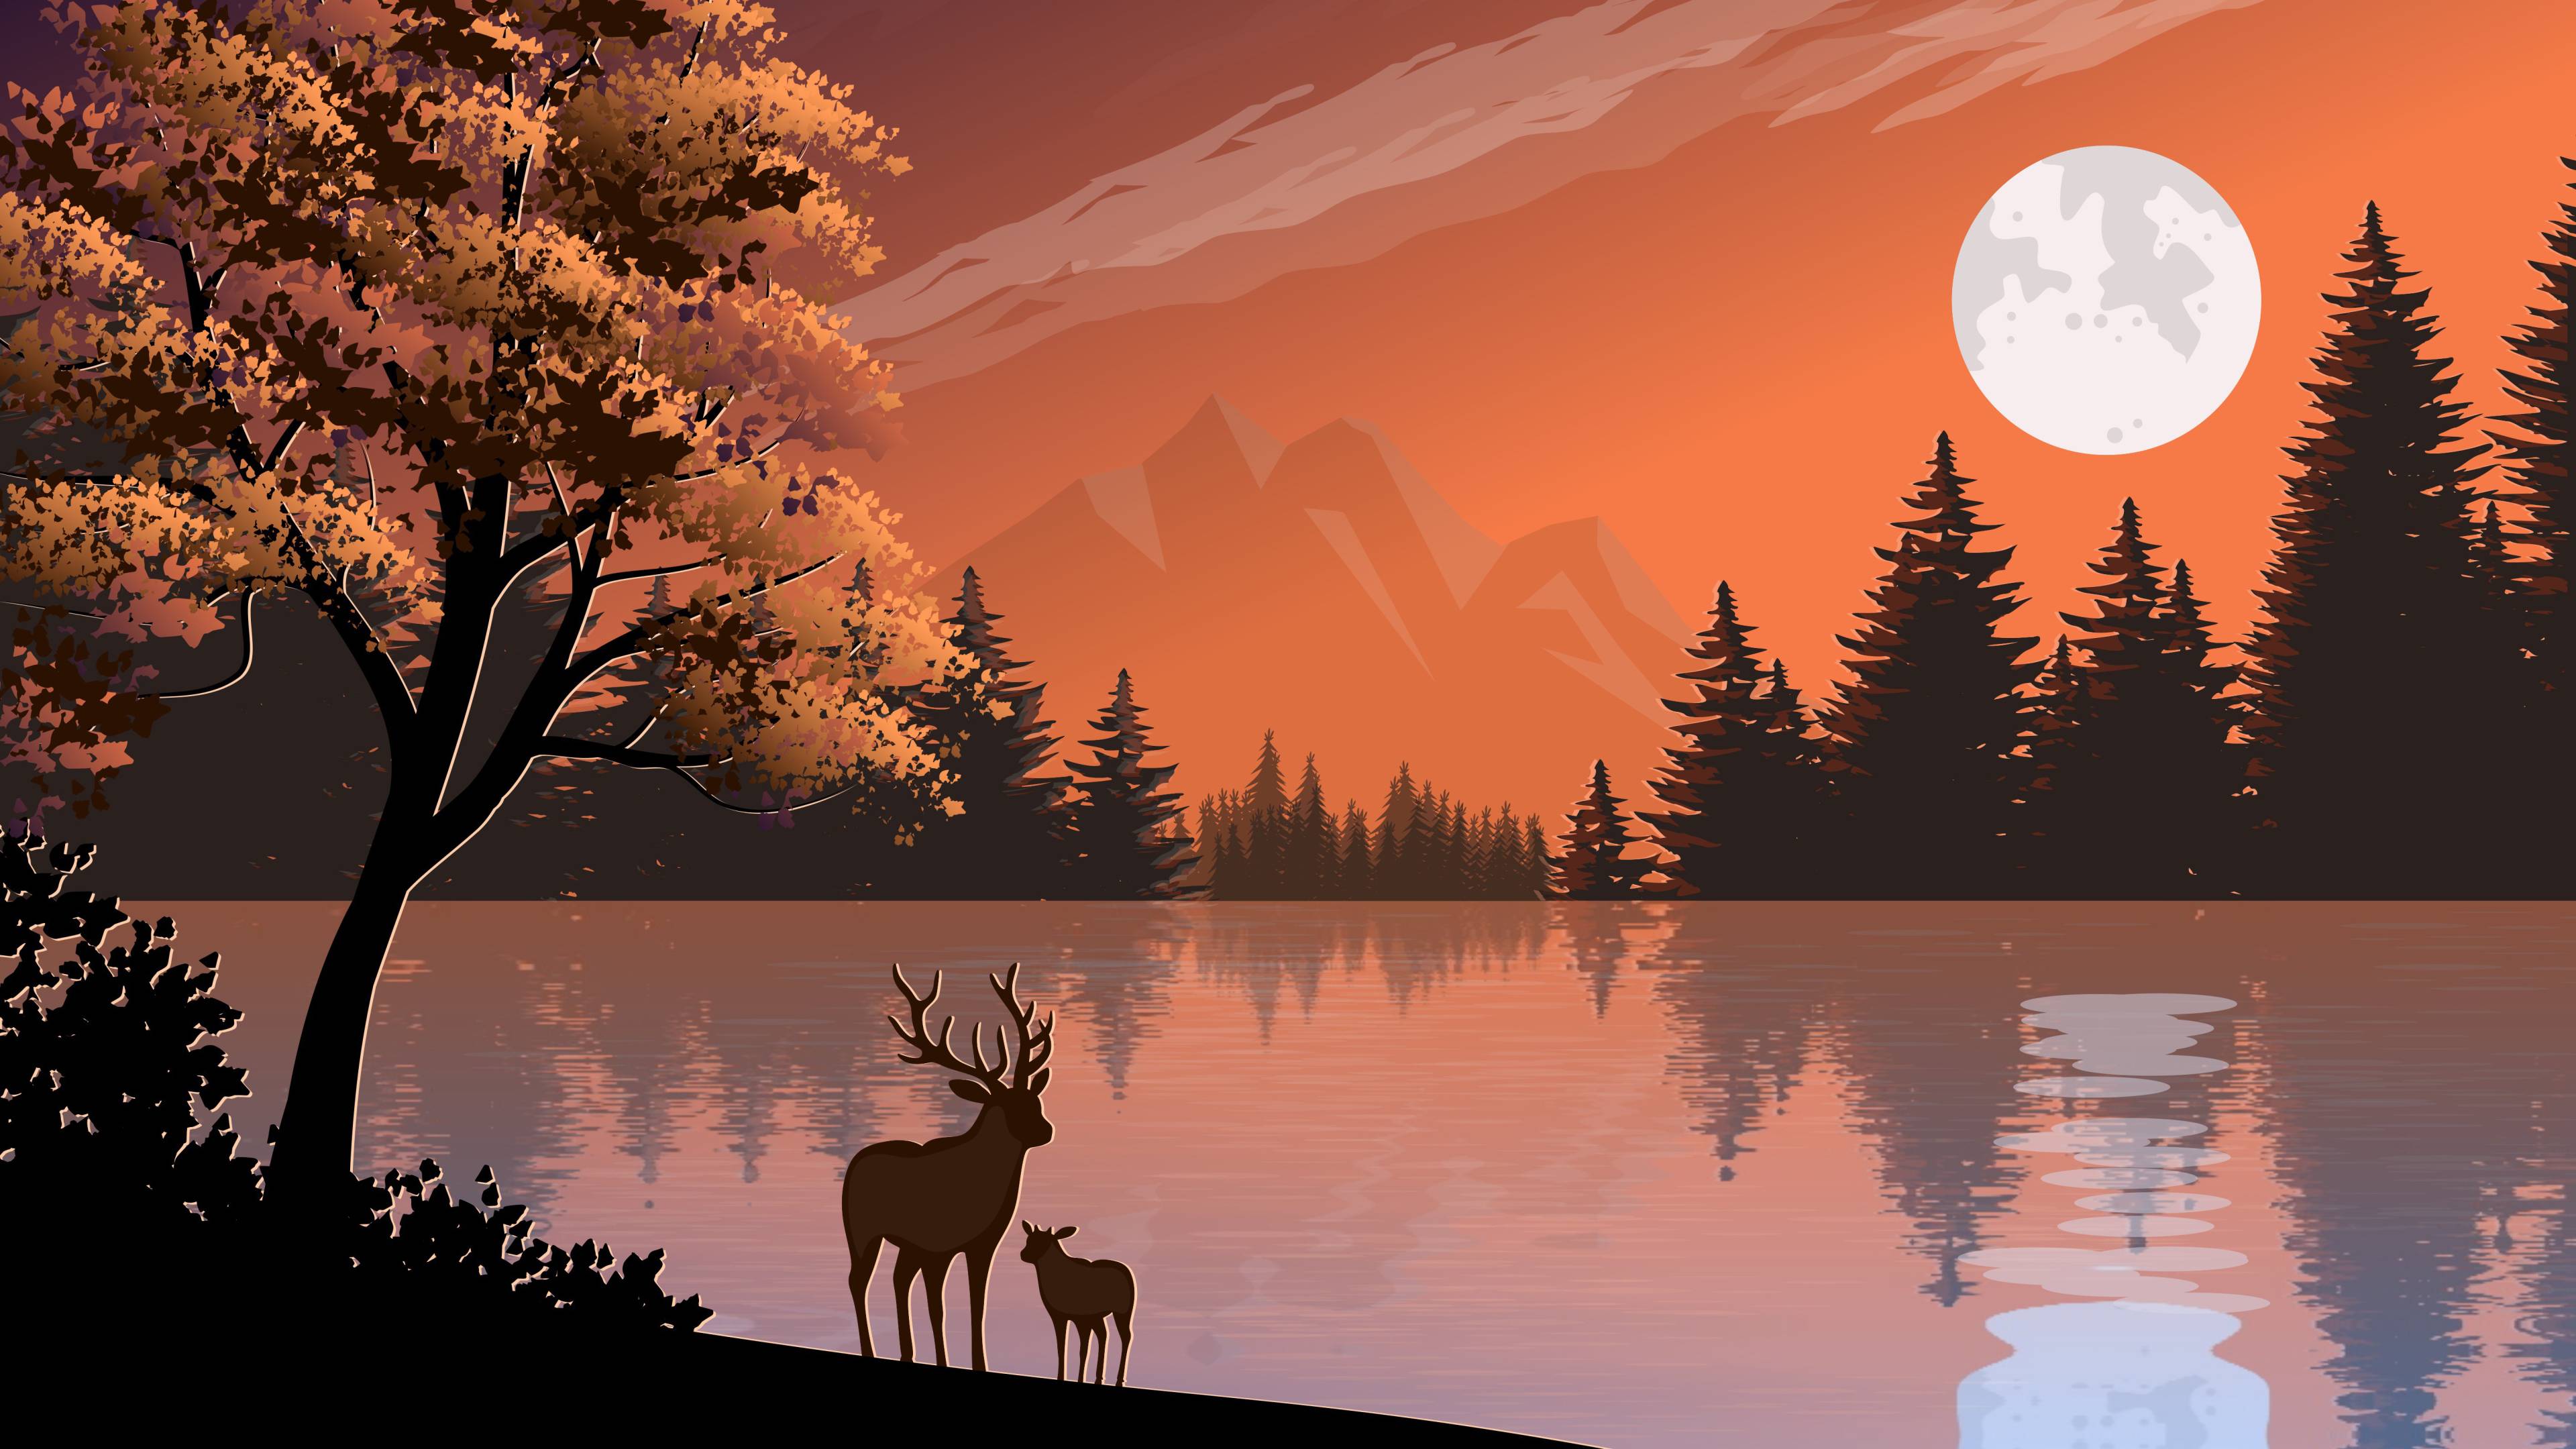 Two deer standing by a lake at sunset - Deer